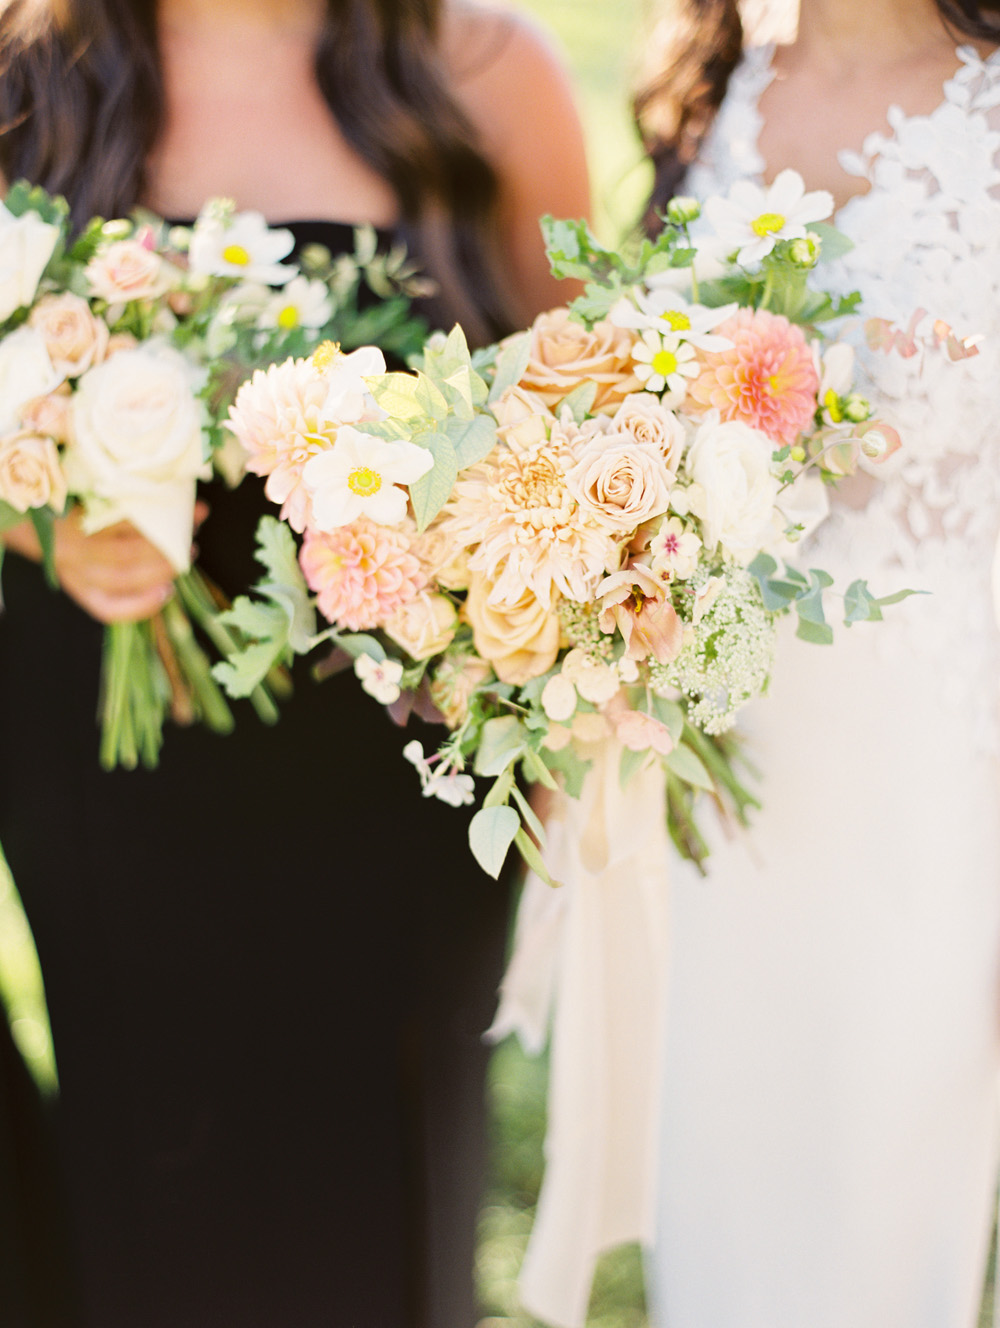 Bridal Bouquet with bridesmaid in soft peachy tones and blush with coral accents by Hops Petunia | Mary Dougherty Photography